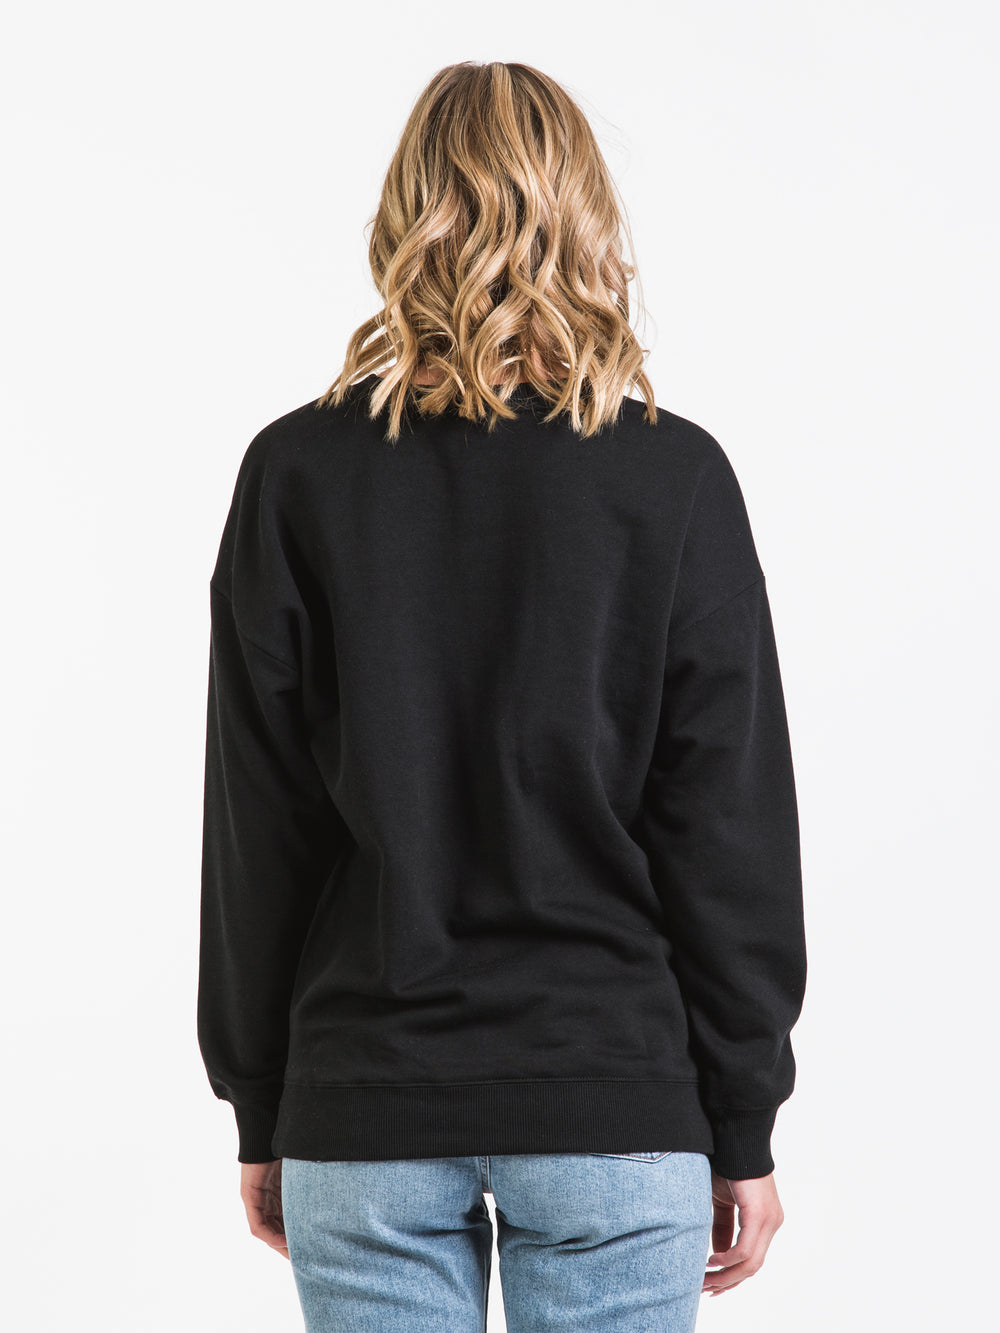 TENTREE EMBROIDERED LOGO OUTLINE OVERSIZED CREWNECK SWEATER - CLEARANCE